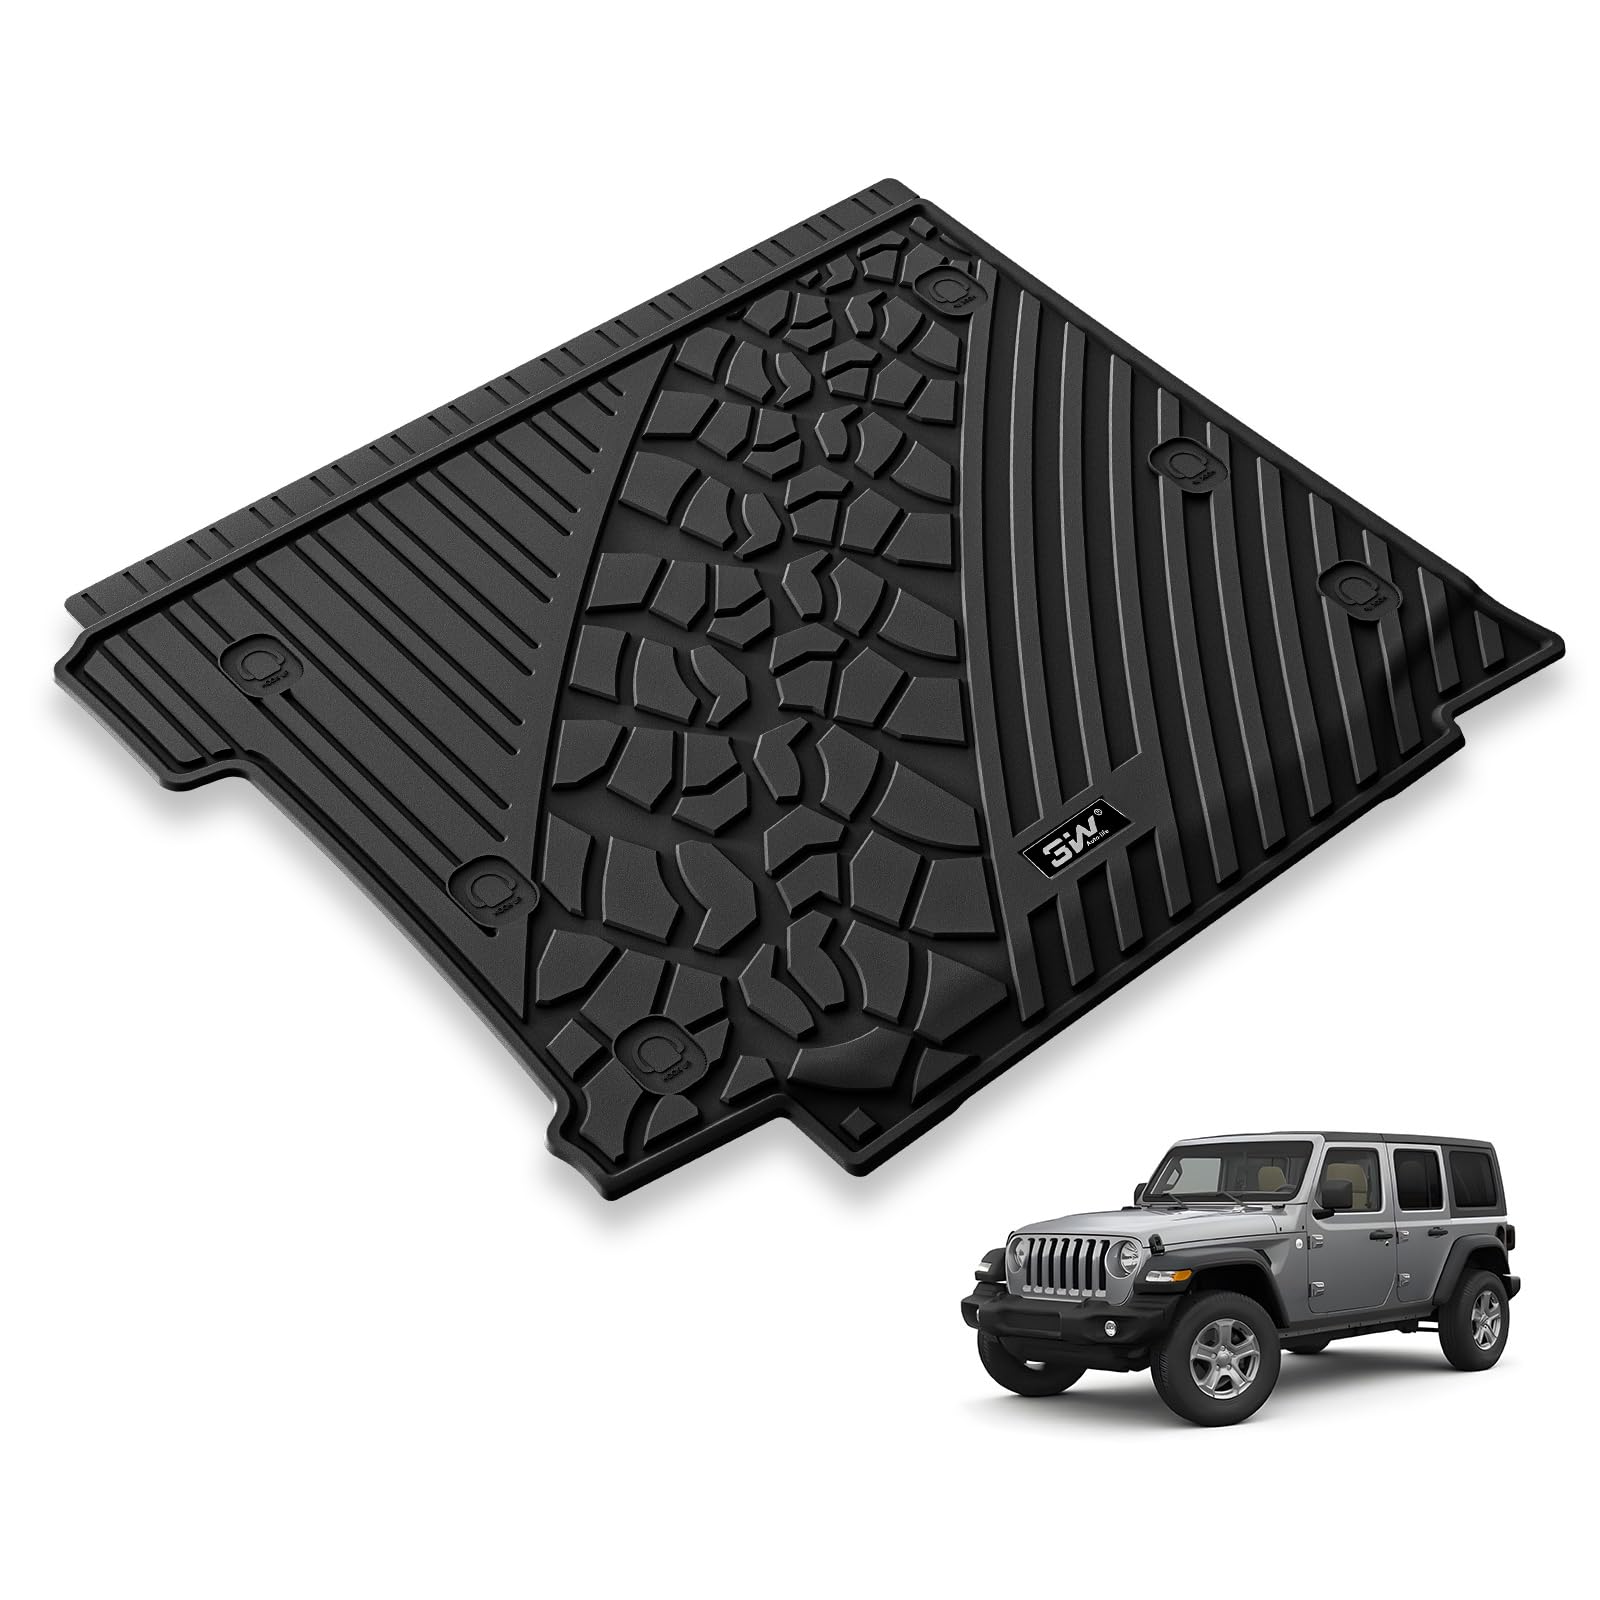 3W Jeep Wrangler JL (Non JK or 4XE) 2018-2023 Custom Floor Mats / Trunk Mat TPE Material & All-Weather Protection Vehicles & Parts 3w 2018-2023 Wrangler JL 2018-2023 with Subwoofer Trunk Mat